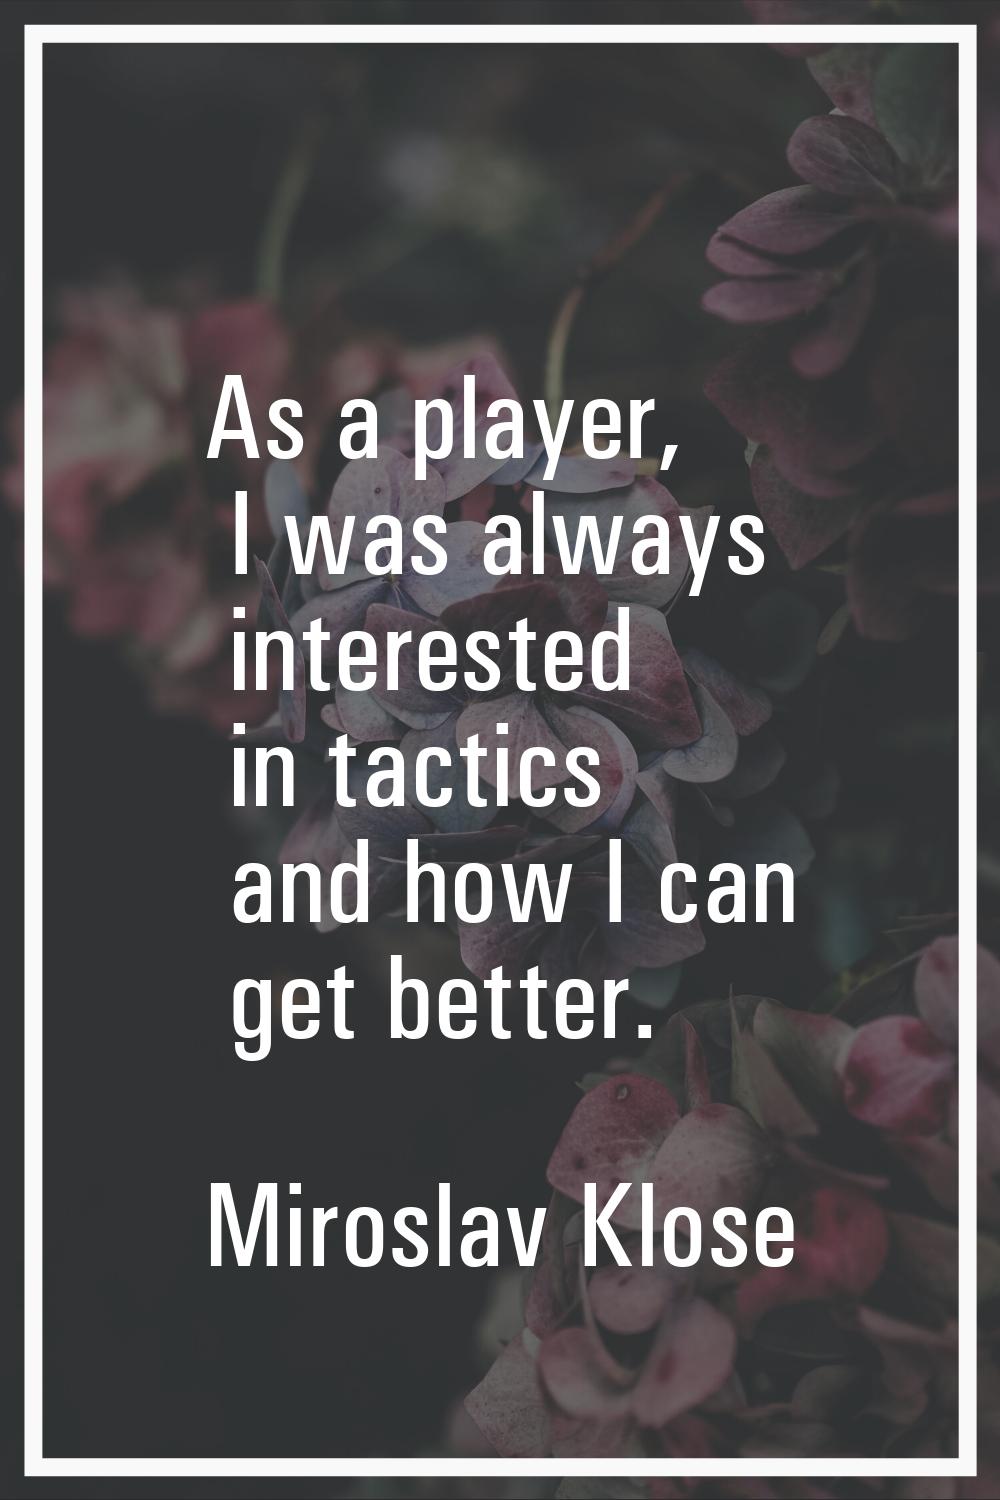 As a player, I was always interested in tactics and how I can get better.